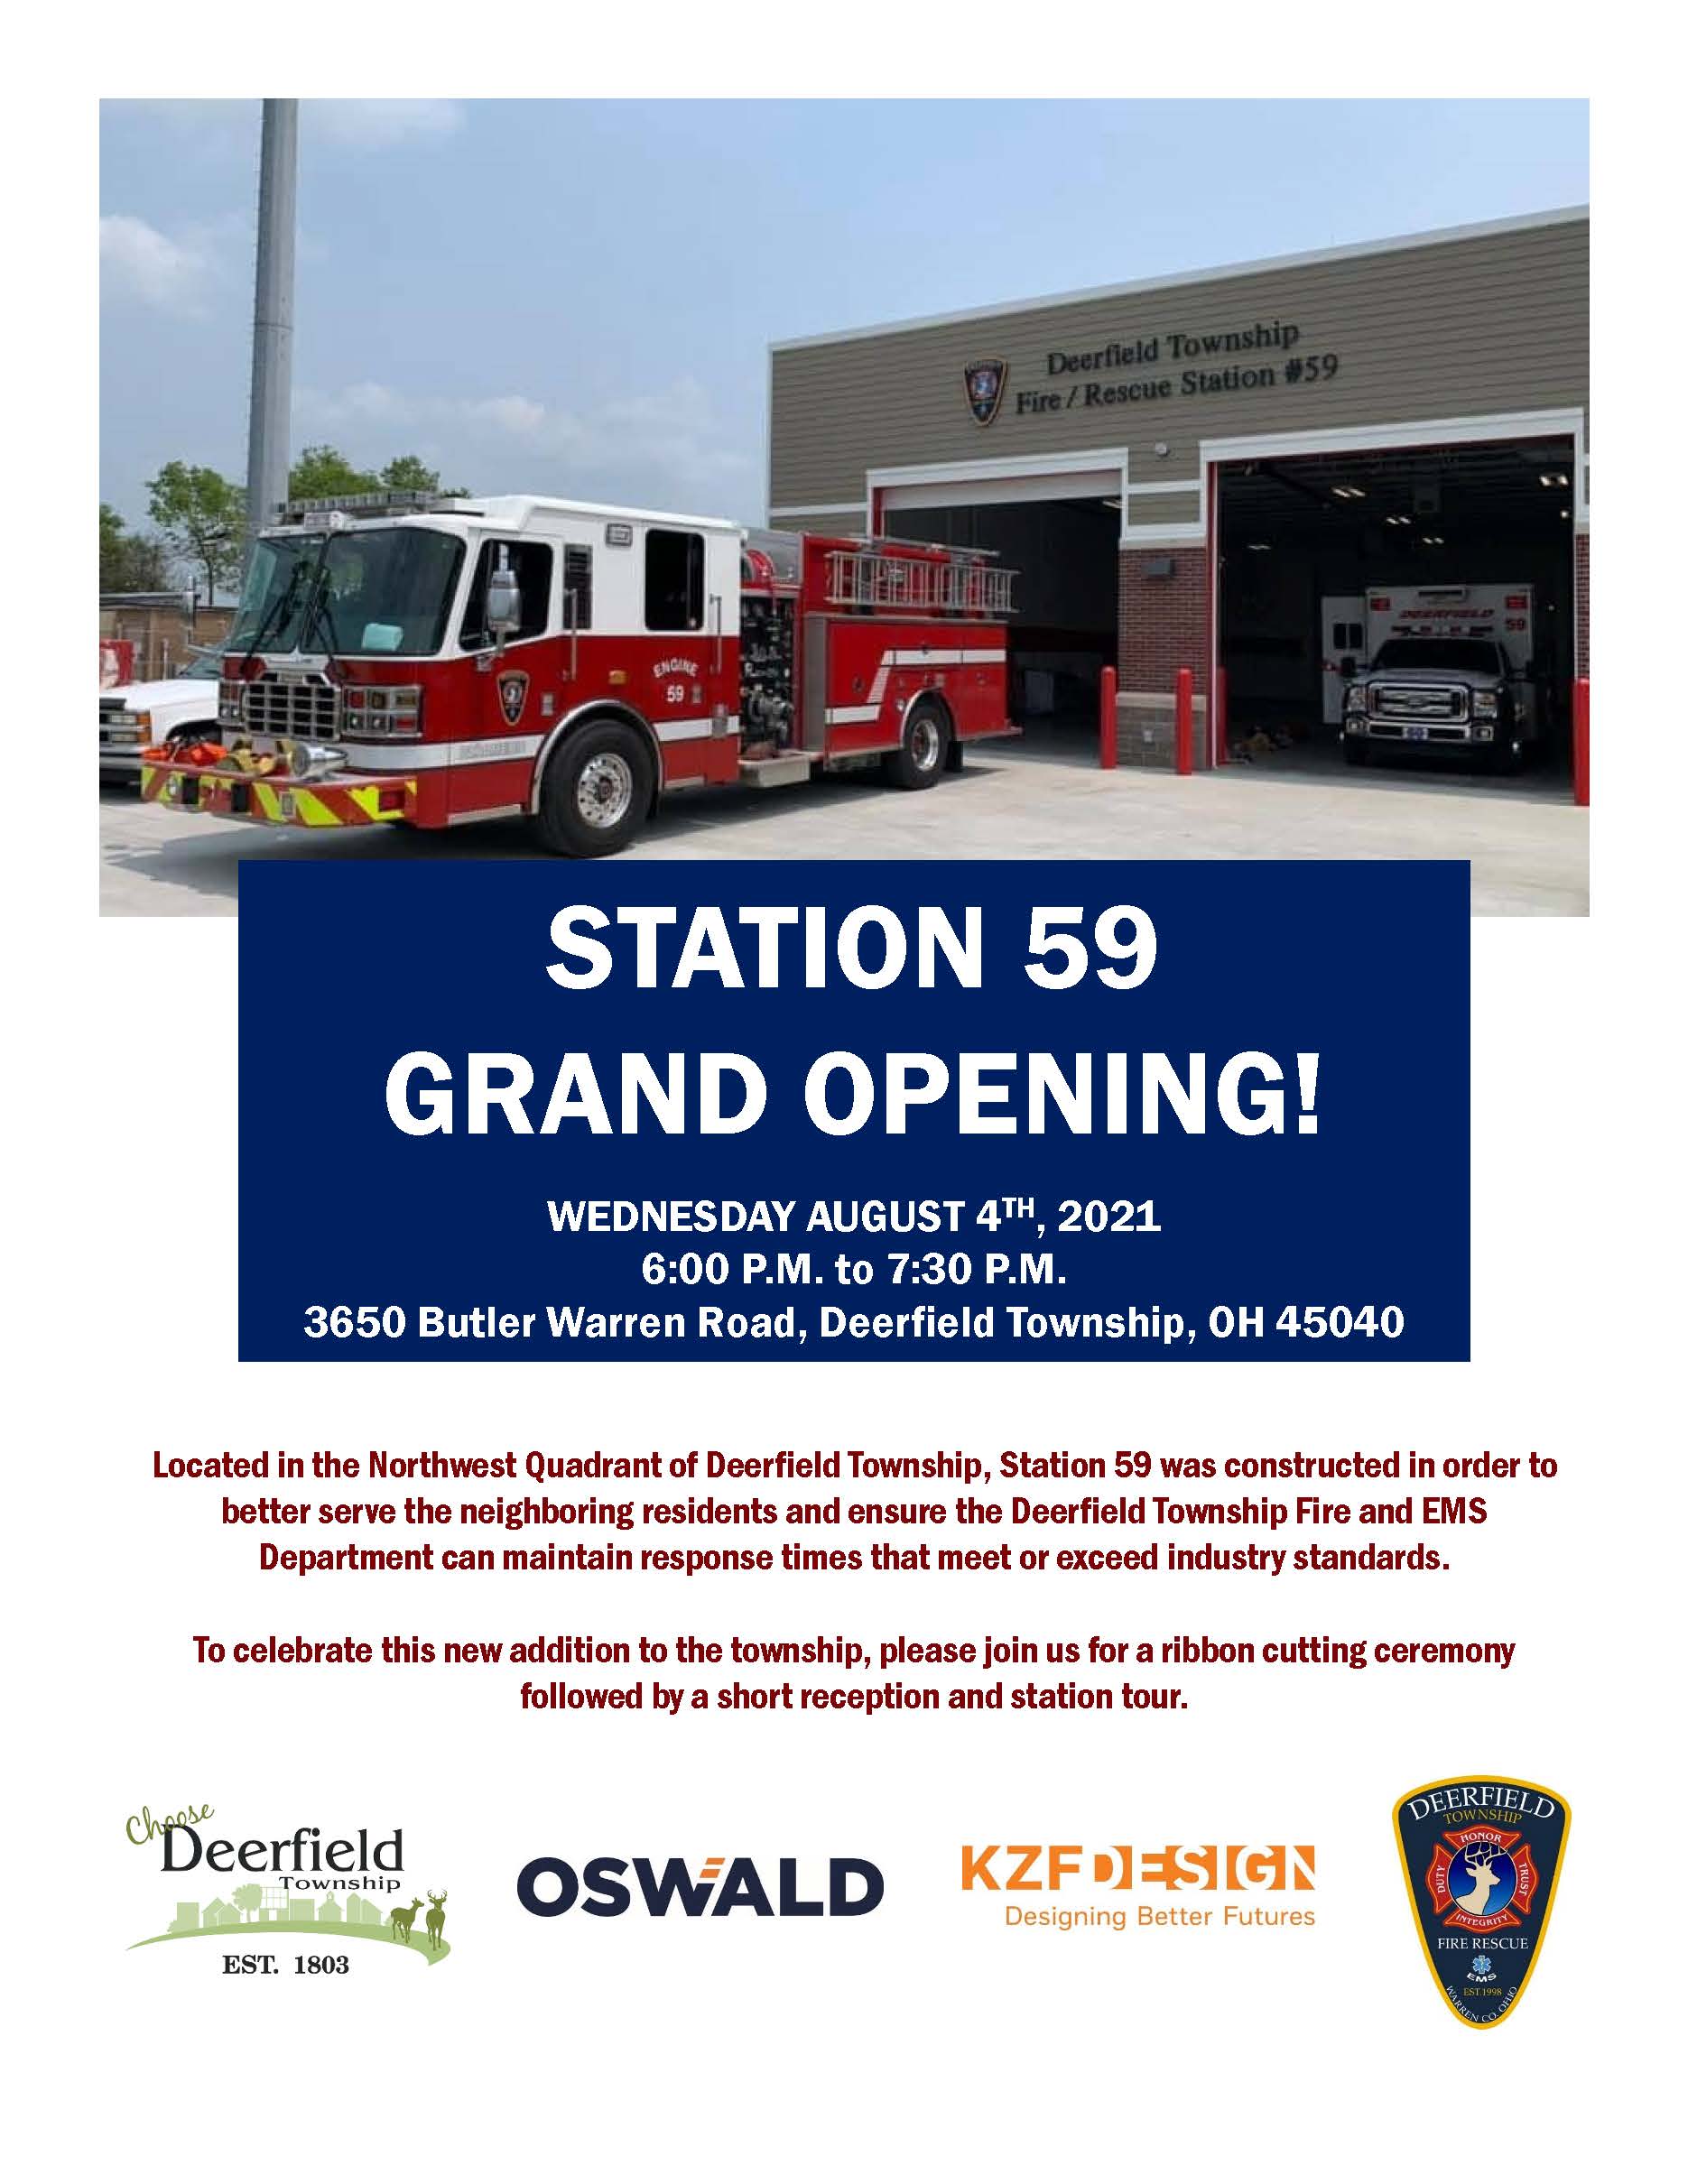 Station 59 Grand Opening